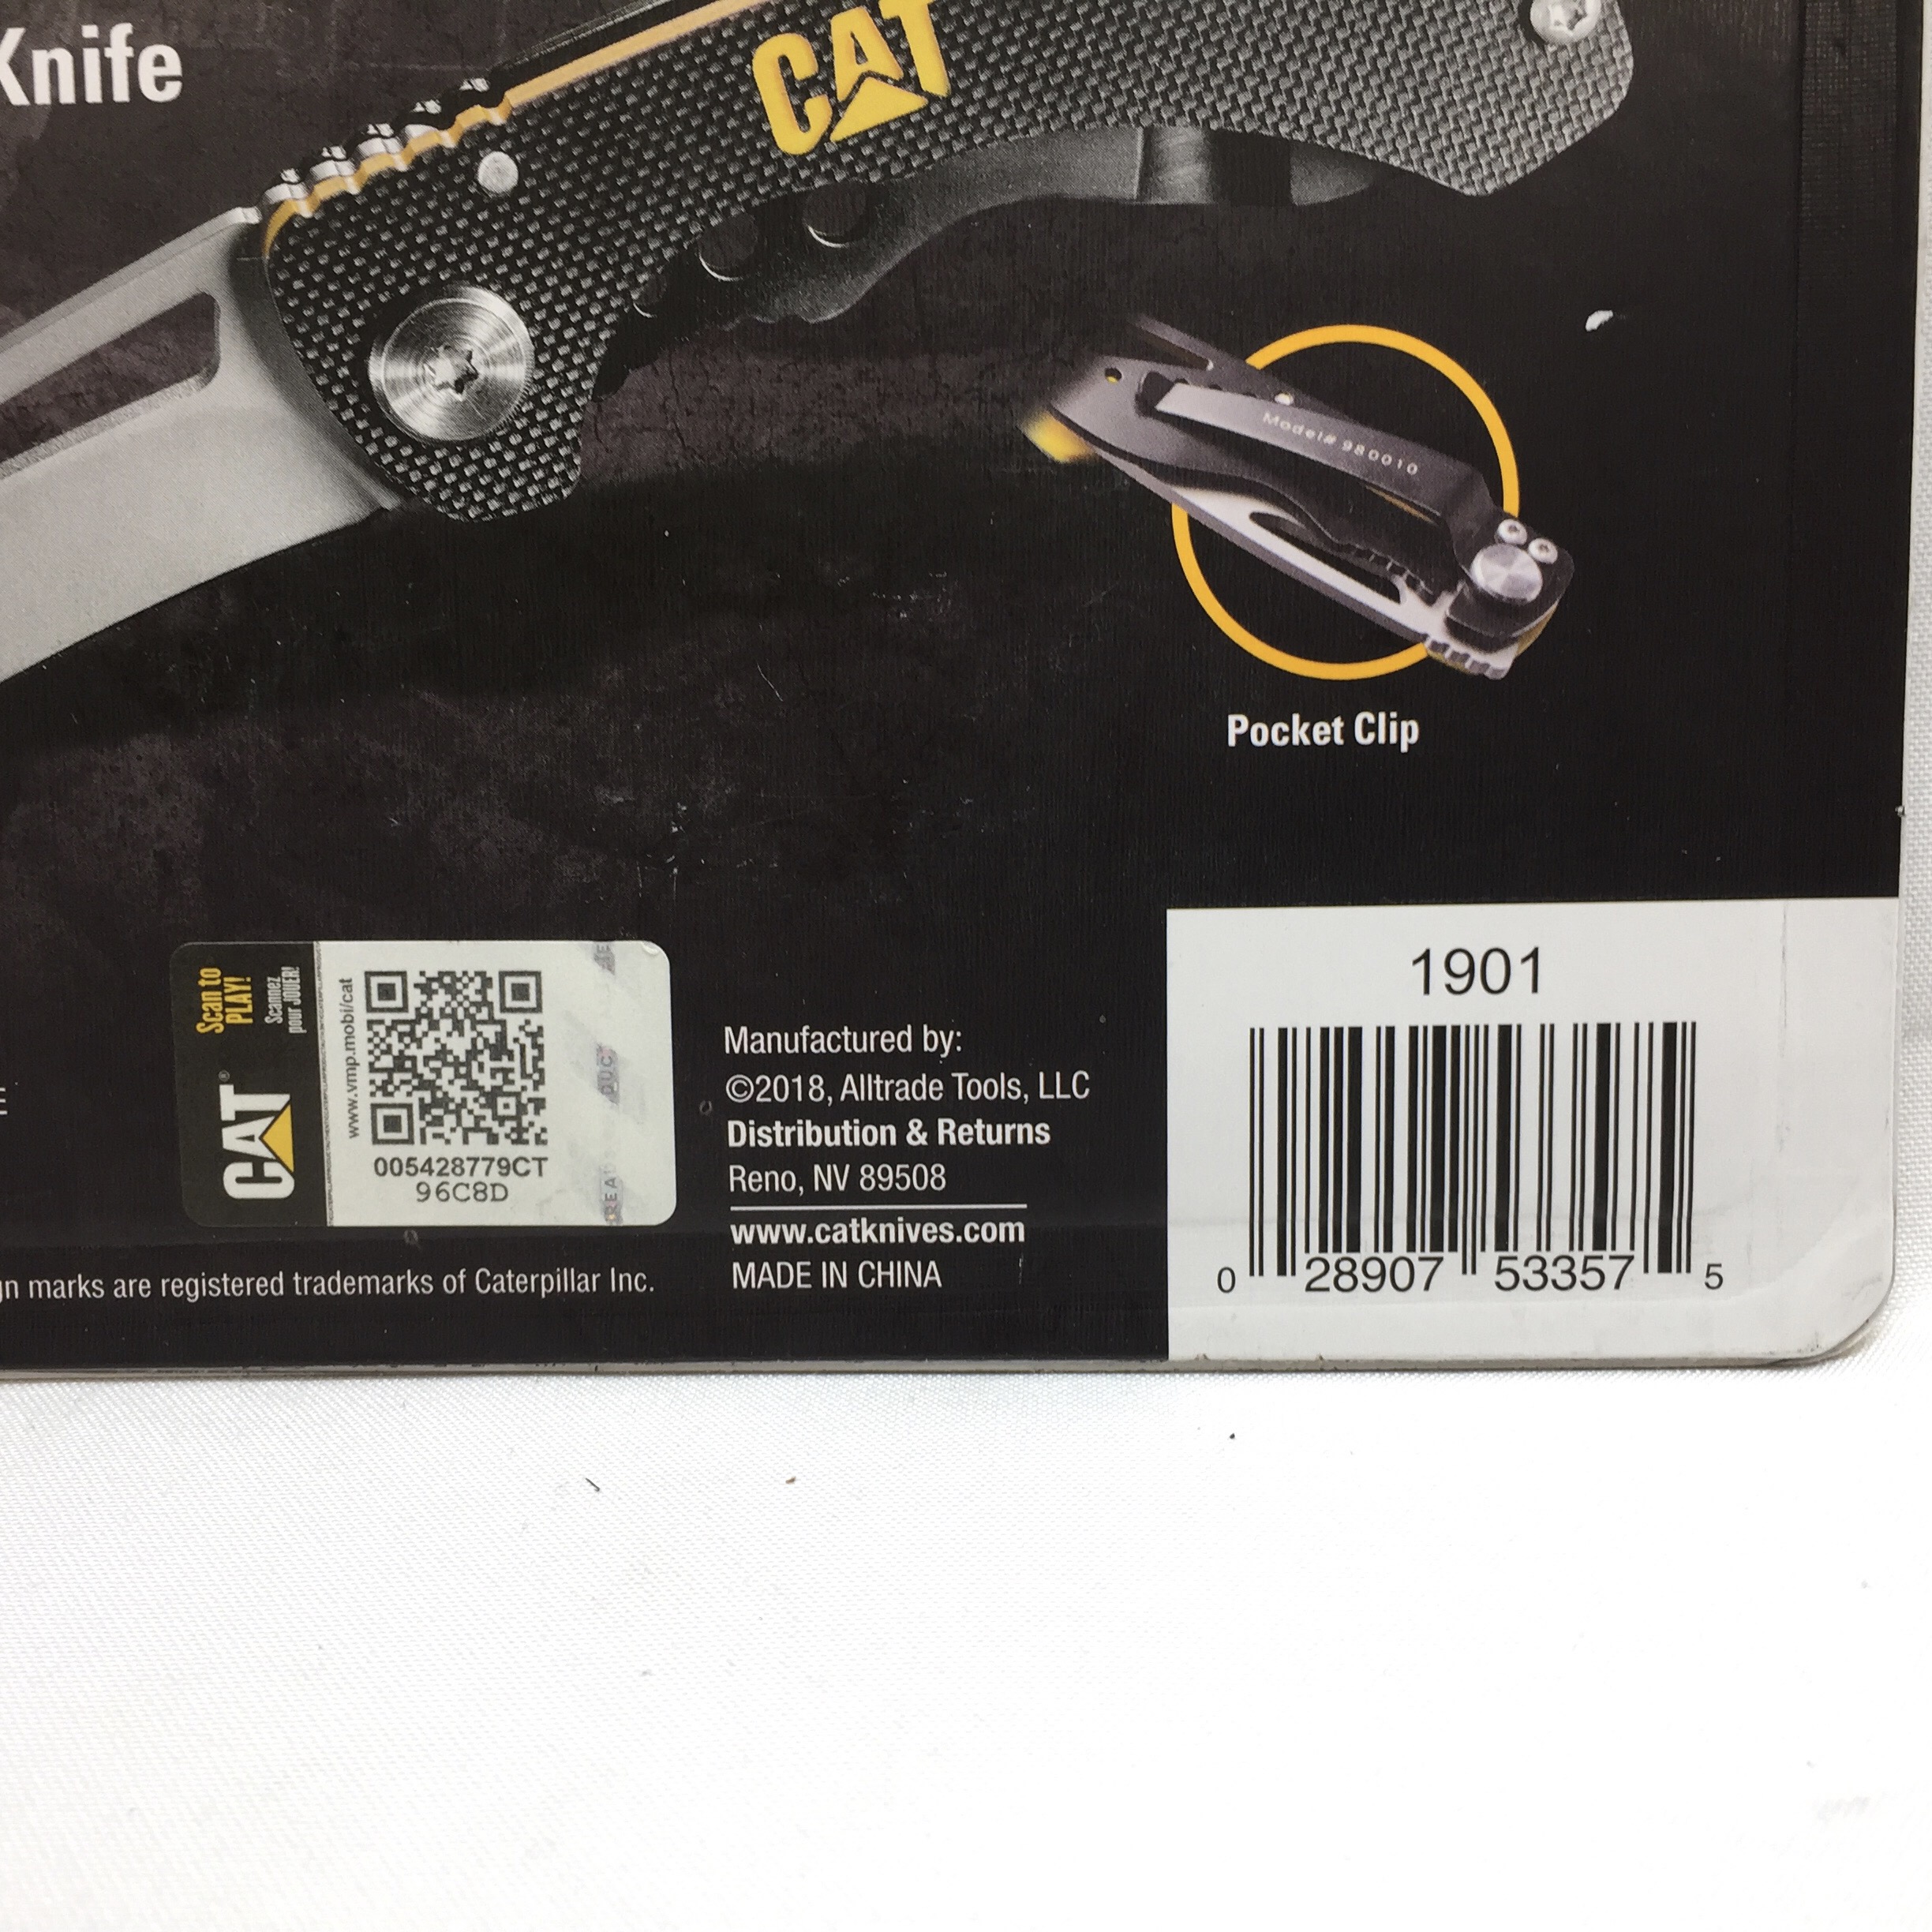 Caterpillar 3Pc Multi-Tool/Knife Set With Gift Box 240357